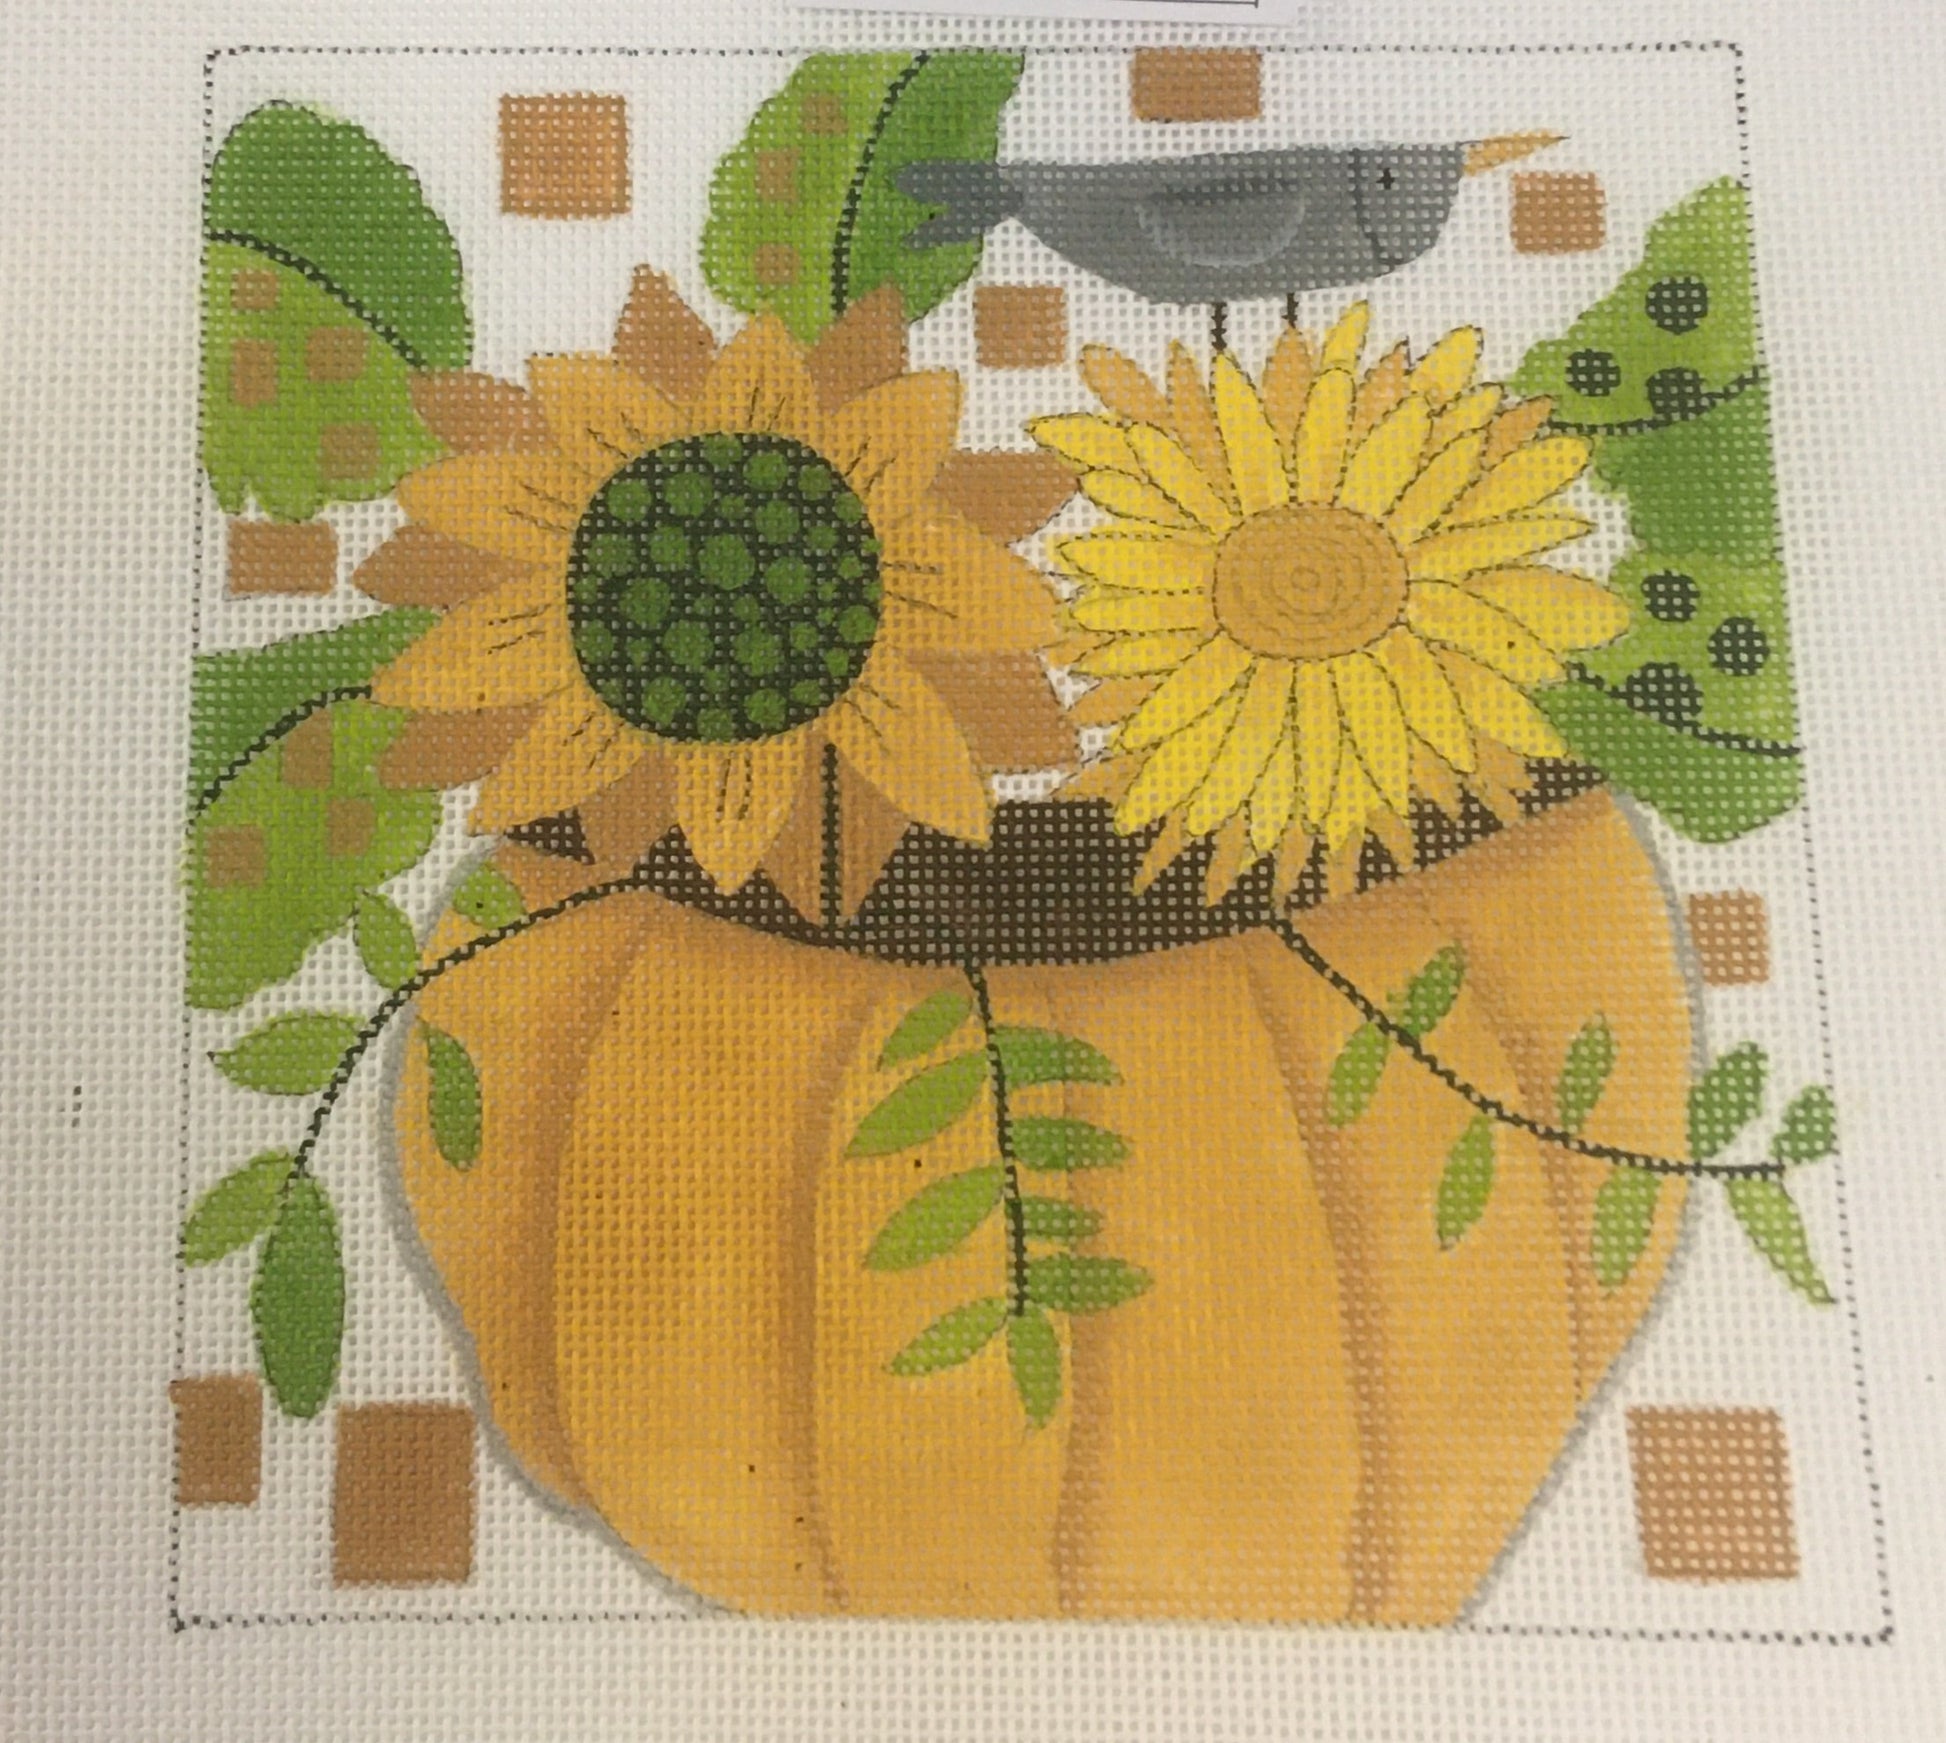 Ditto! Needlepoint Works needlepoint canvas of a pumpkin holding sunflowers